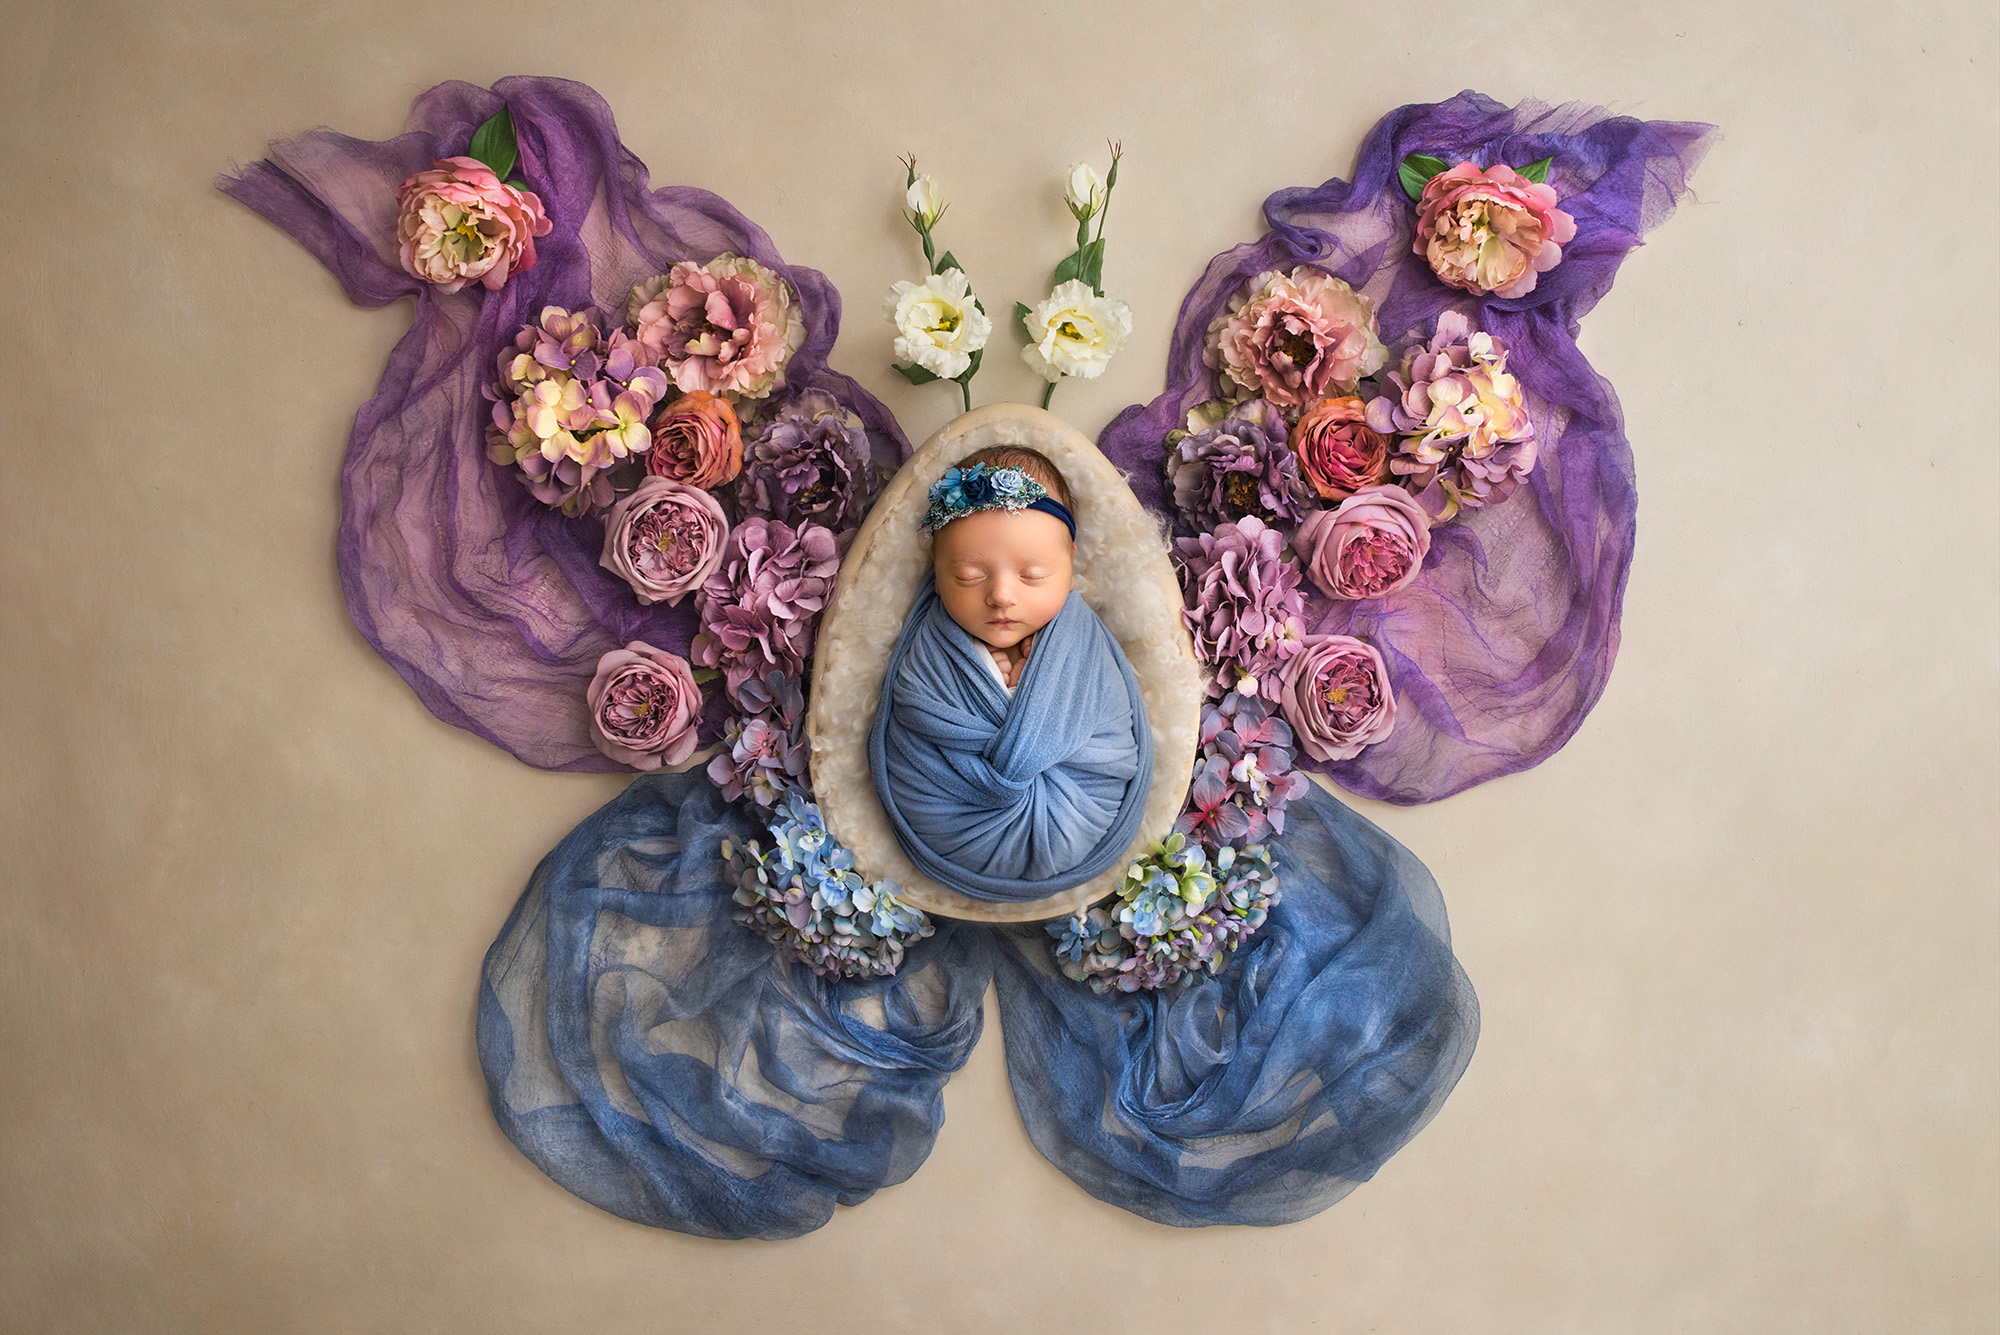 In the center of a floral butterfly, a precious newborn wrapped in blue exudes serenity and beauty